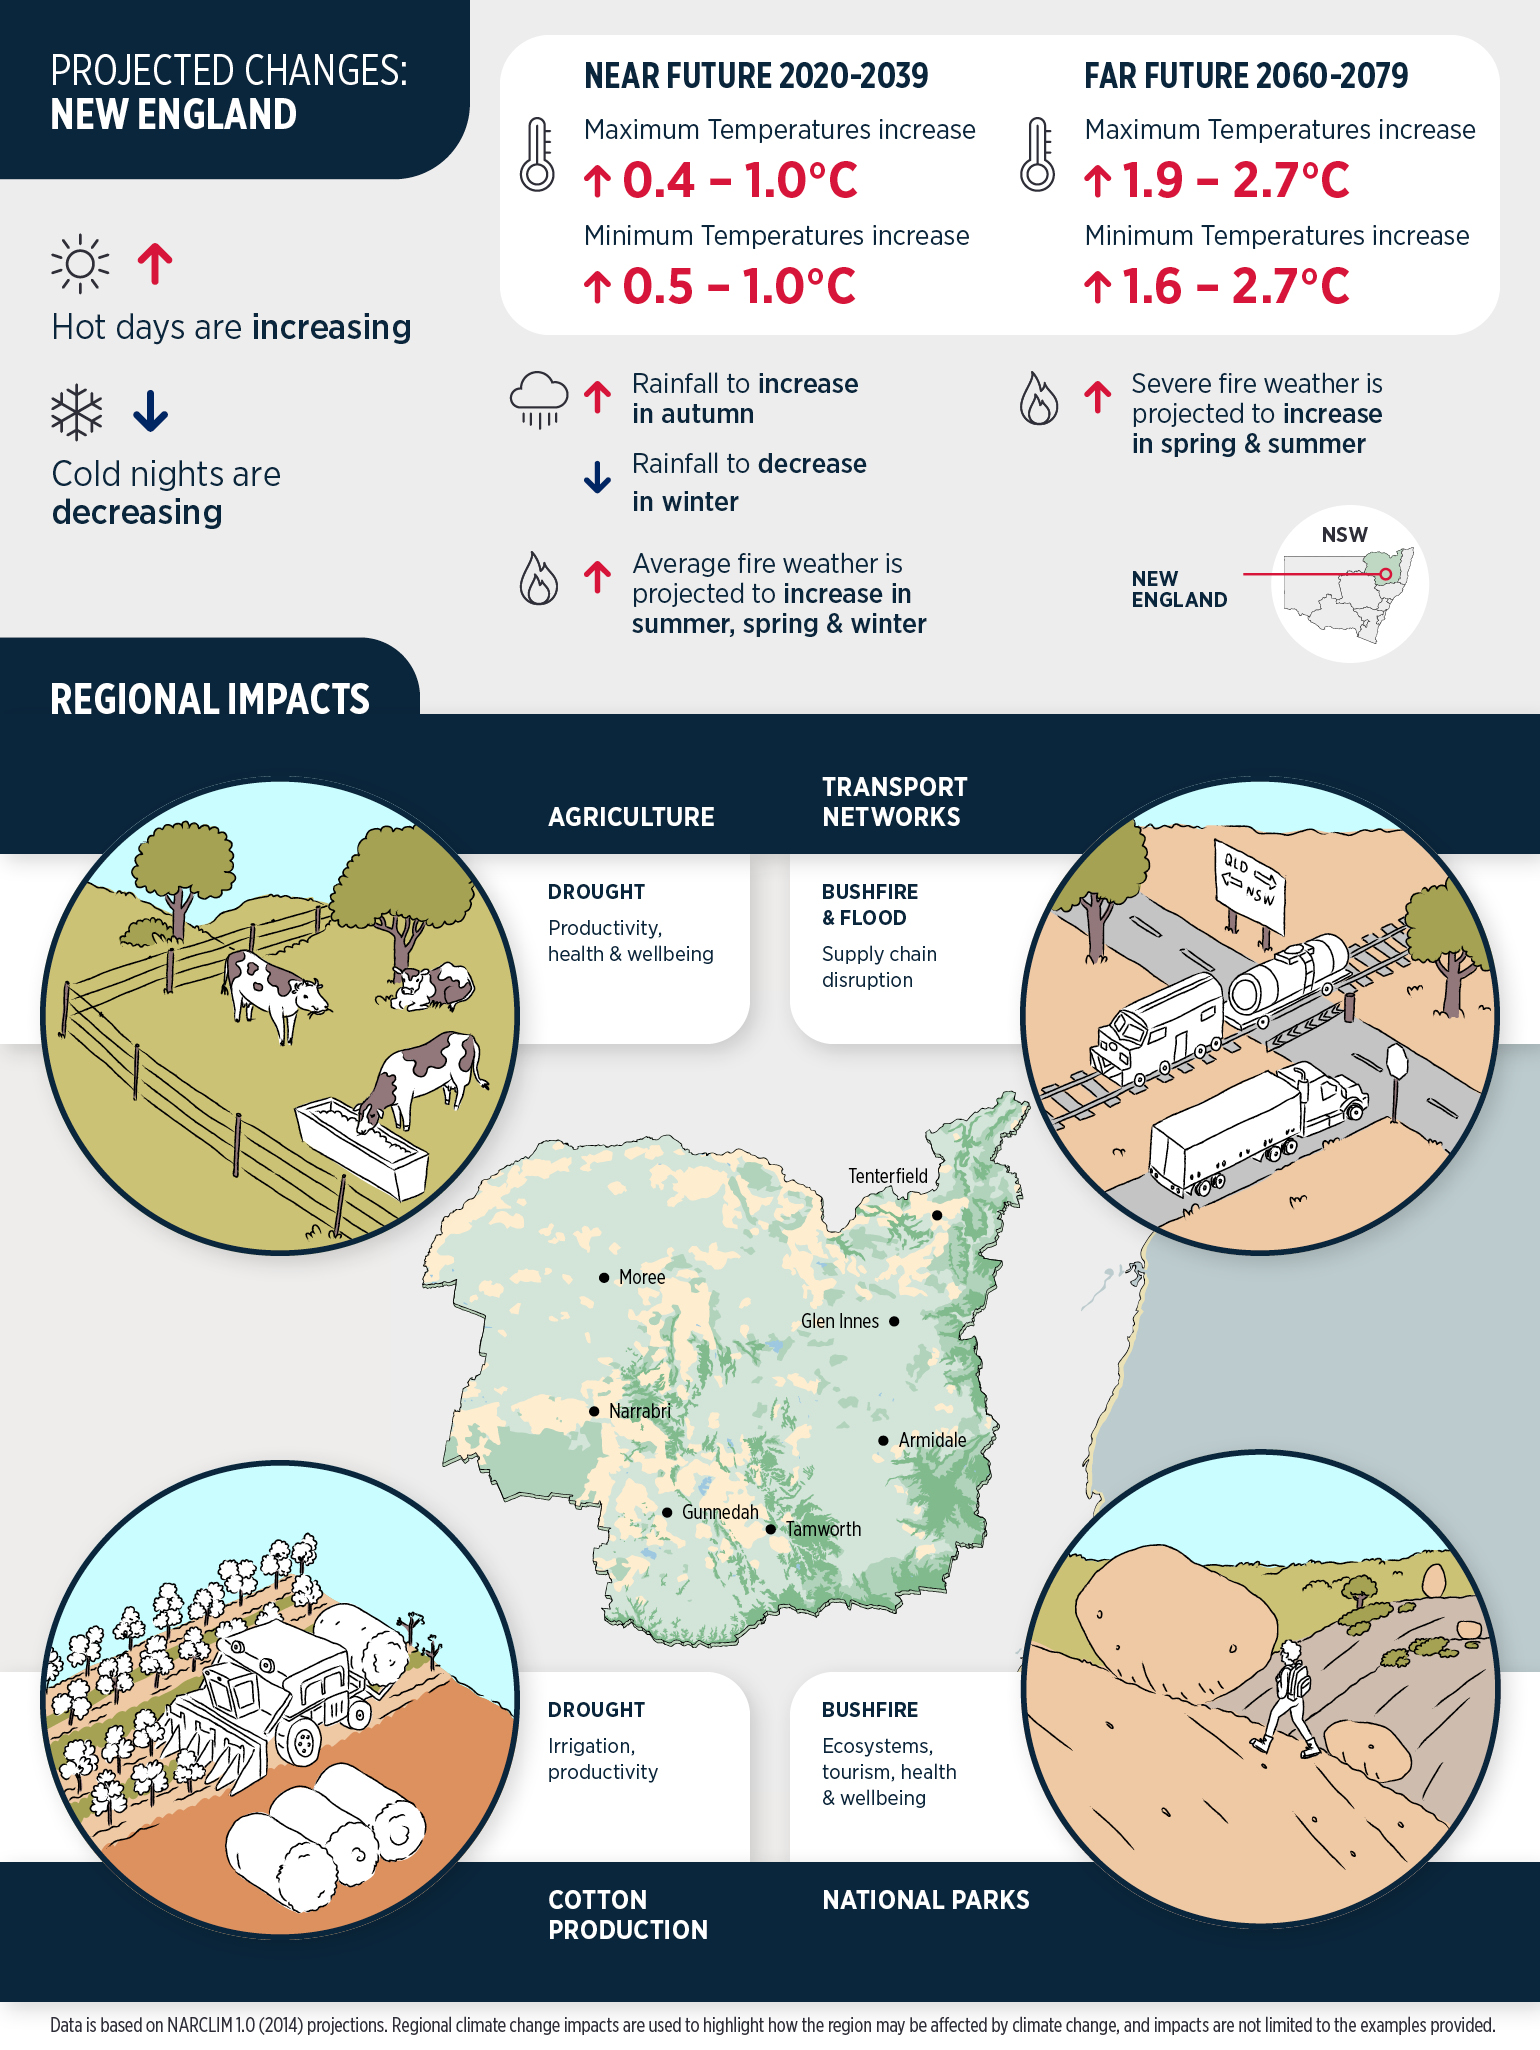 New England and North West climate change projections and regional impacts infographic